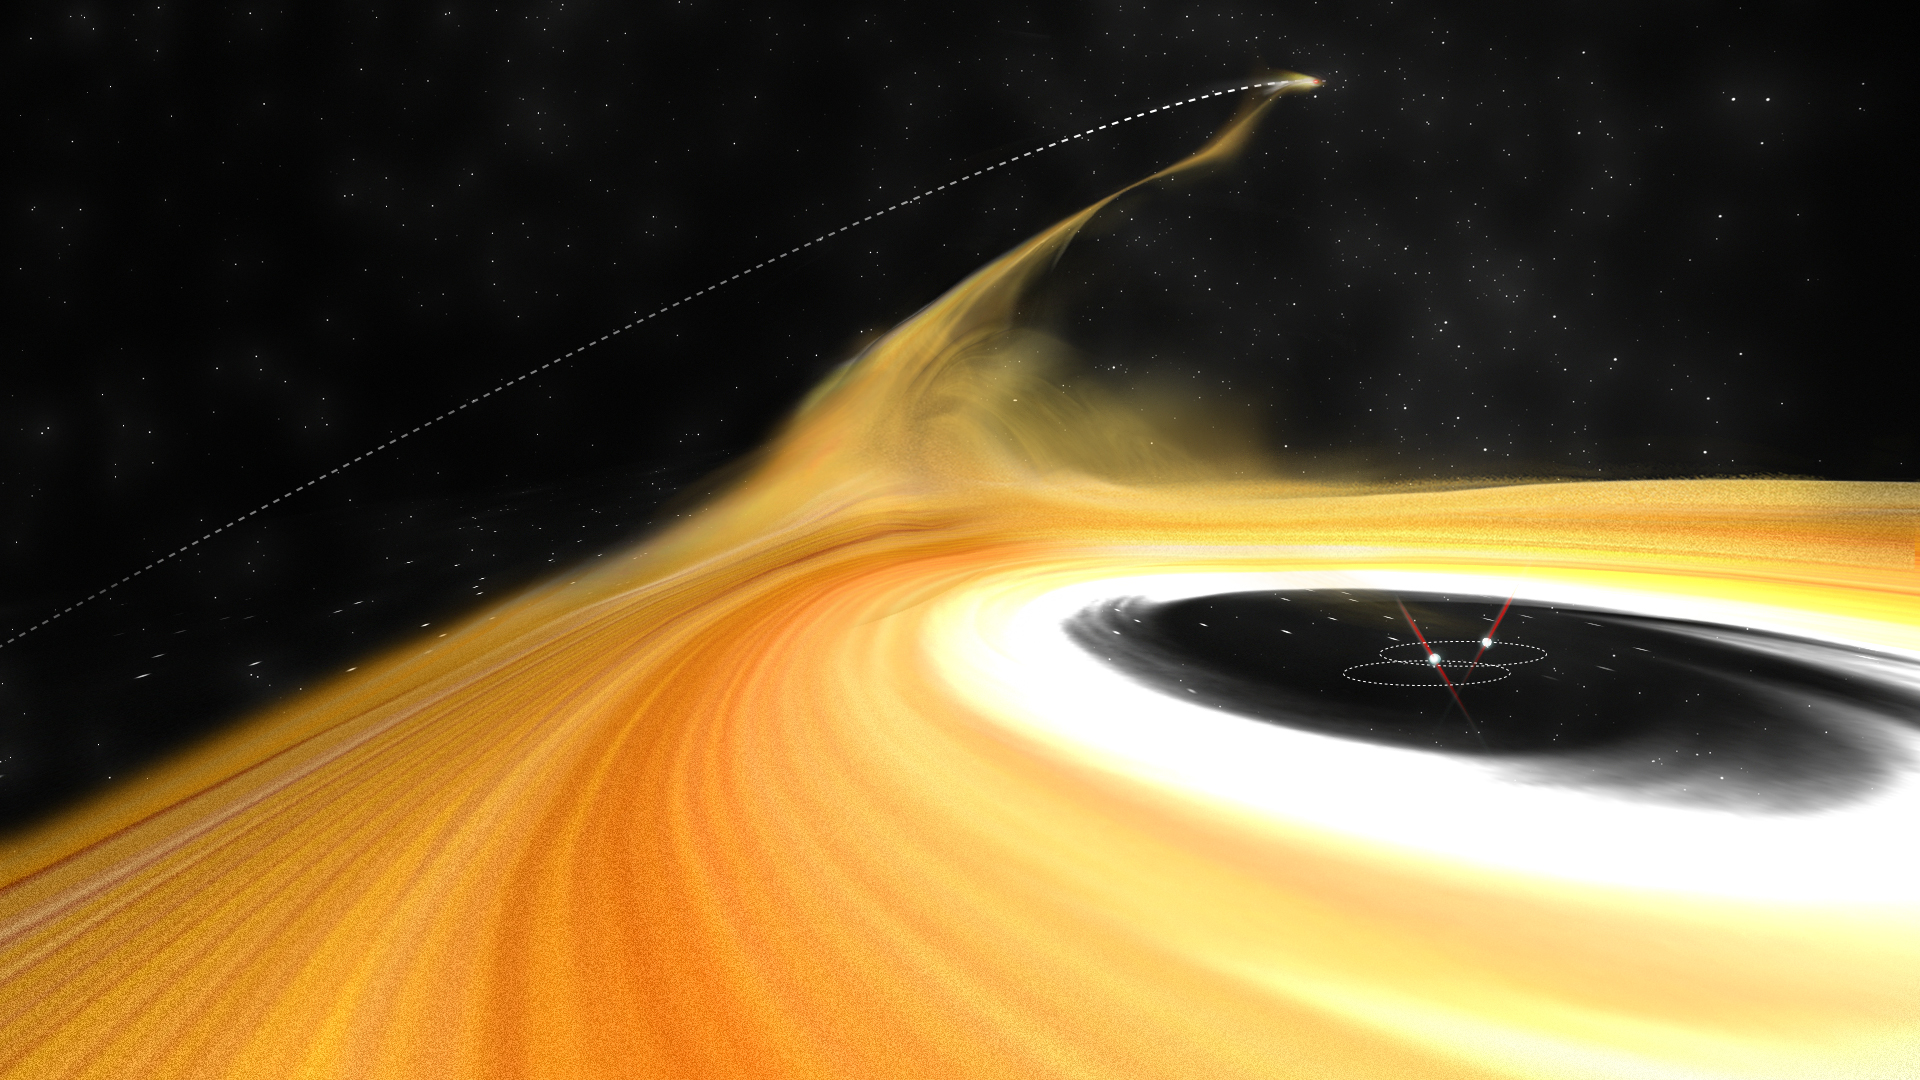 <p>Scientists have captured an intruder object disrupting the protoplanetary disk—birthplace of planets—in Z Canis Majors (Z CMa), a star in the Canis Majoris constellation. This artist’s impression shows the perturber leaving the star system, pulling a long stream of gas from the protoplanetary disk along with it. Observational data from the Subaru Telescope, Karl G. Jansky Very Large Array, and Atacama Large Millimeter/submillimeter Array suggest the intruder object was responsible for the creati on of these gaseous streams, and its “visit” may have other as yet unknown impacts on the growth and development of planets in the star system.</p>
<p>Credit: ALMA (ESO/NAOJ/NRAO), B. Saxton (NRAO/AUI/NSF)</p>
